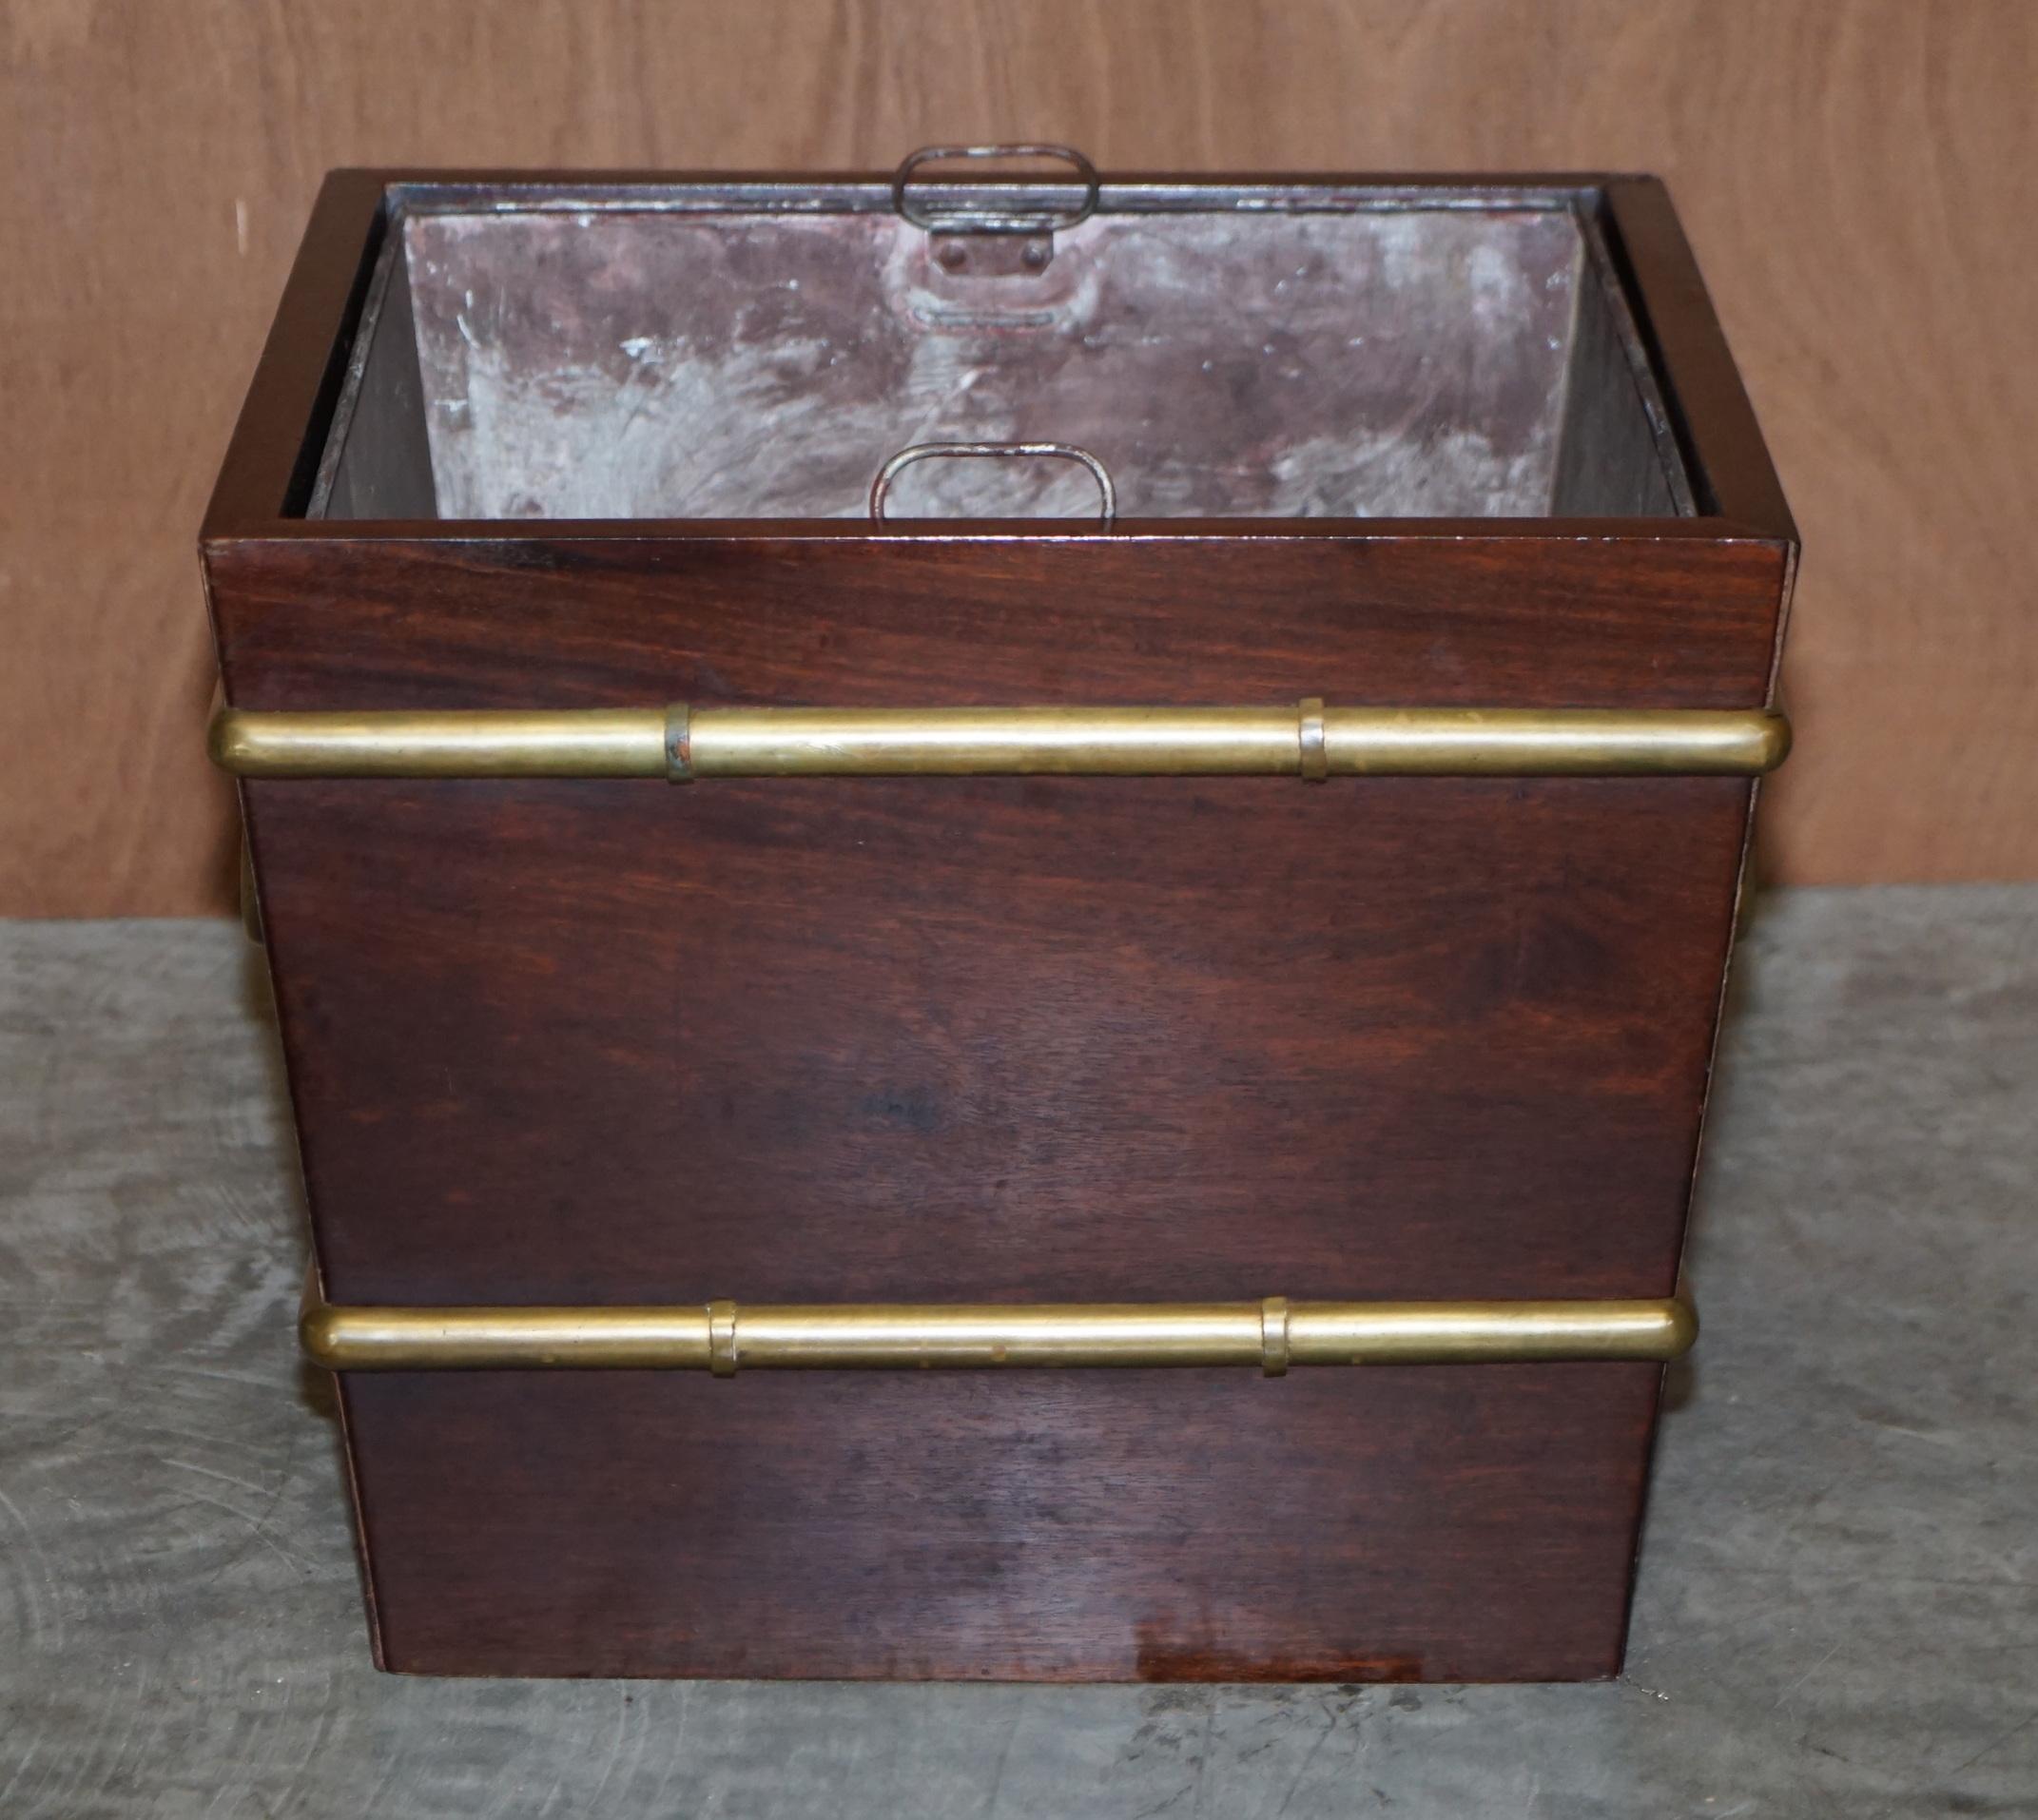 We are delighted to offer for sale this stunning Antique Georgian mahogany and thick solid brass wine bucket with period zinc liner

A very good looking and well made piece, it would make a wonderful log bin to sit next to a fire. The piece made